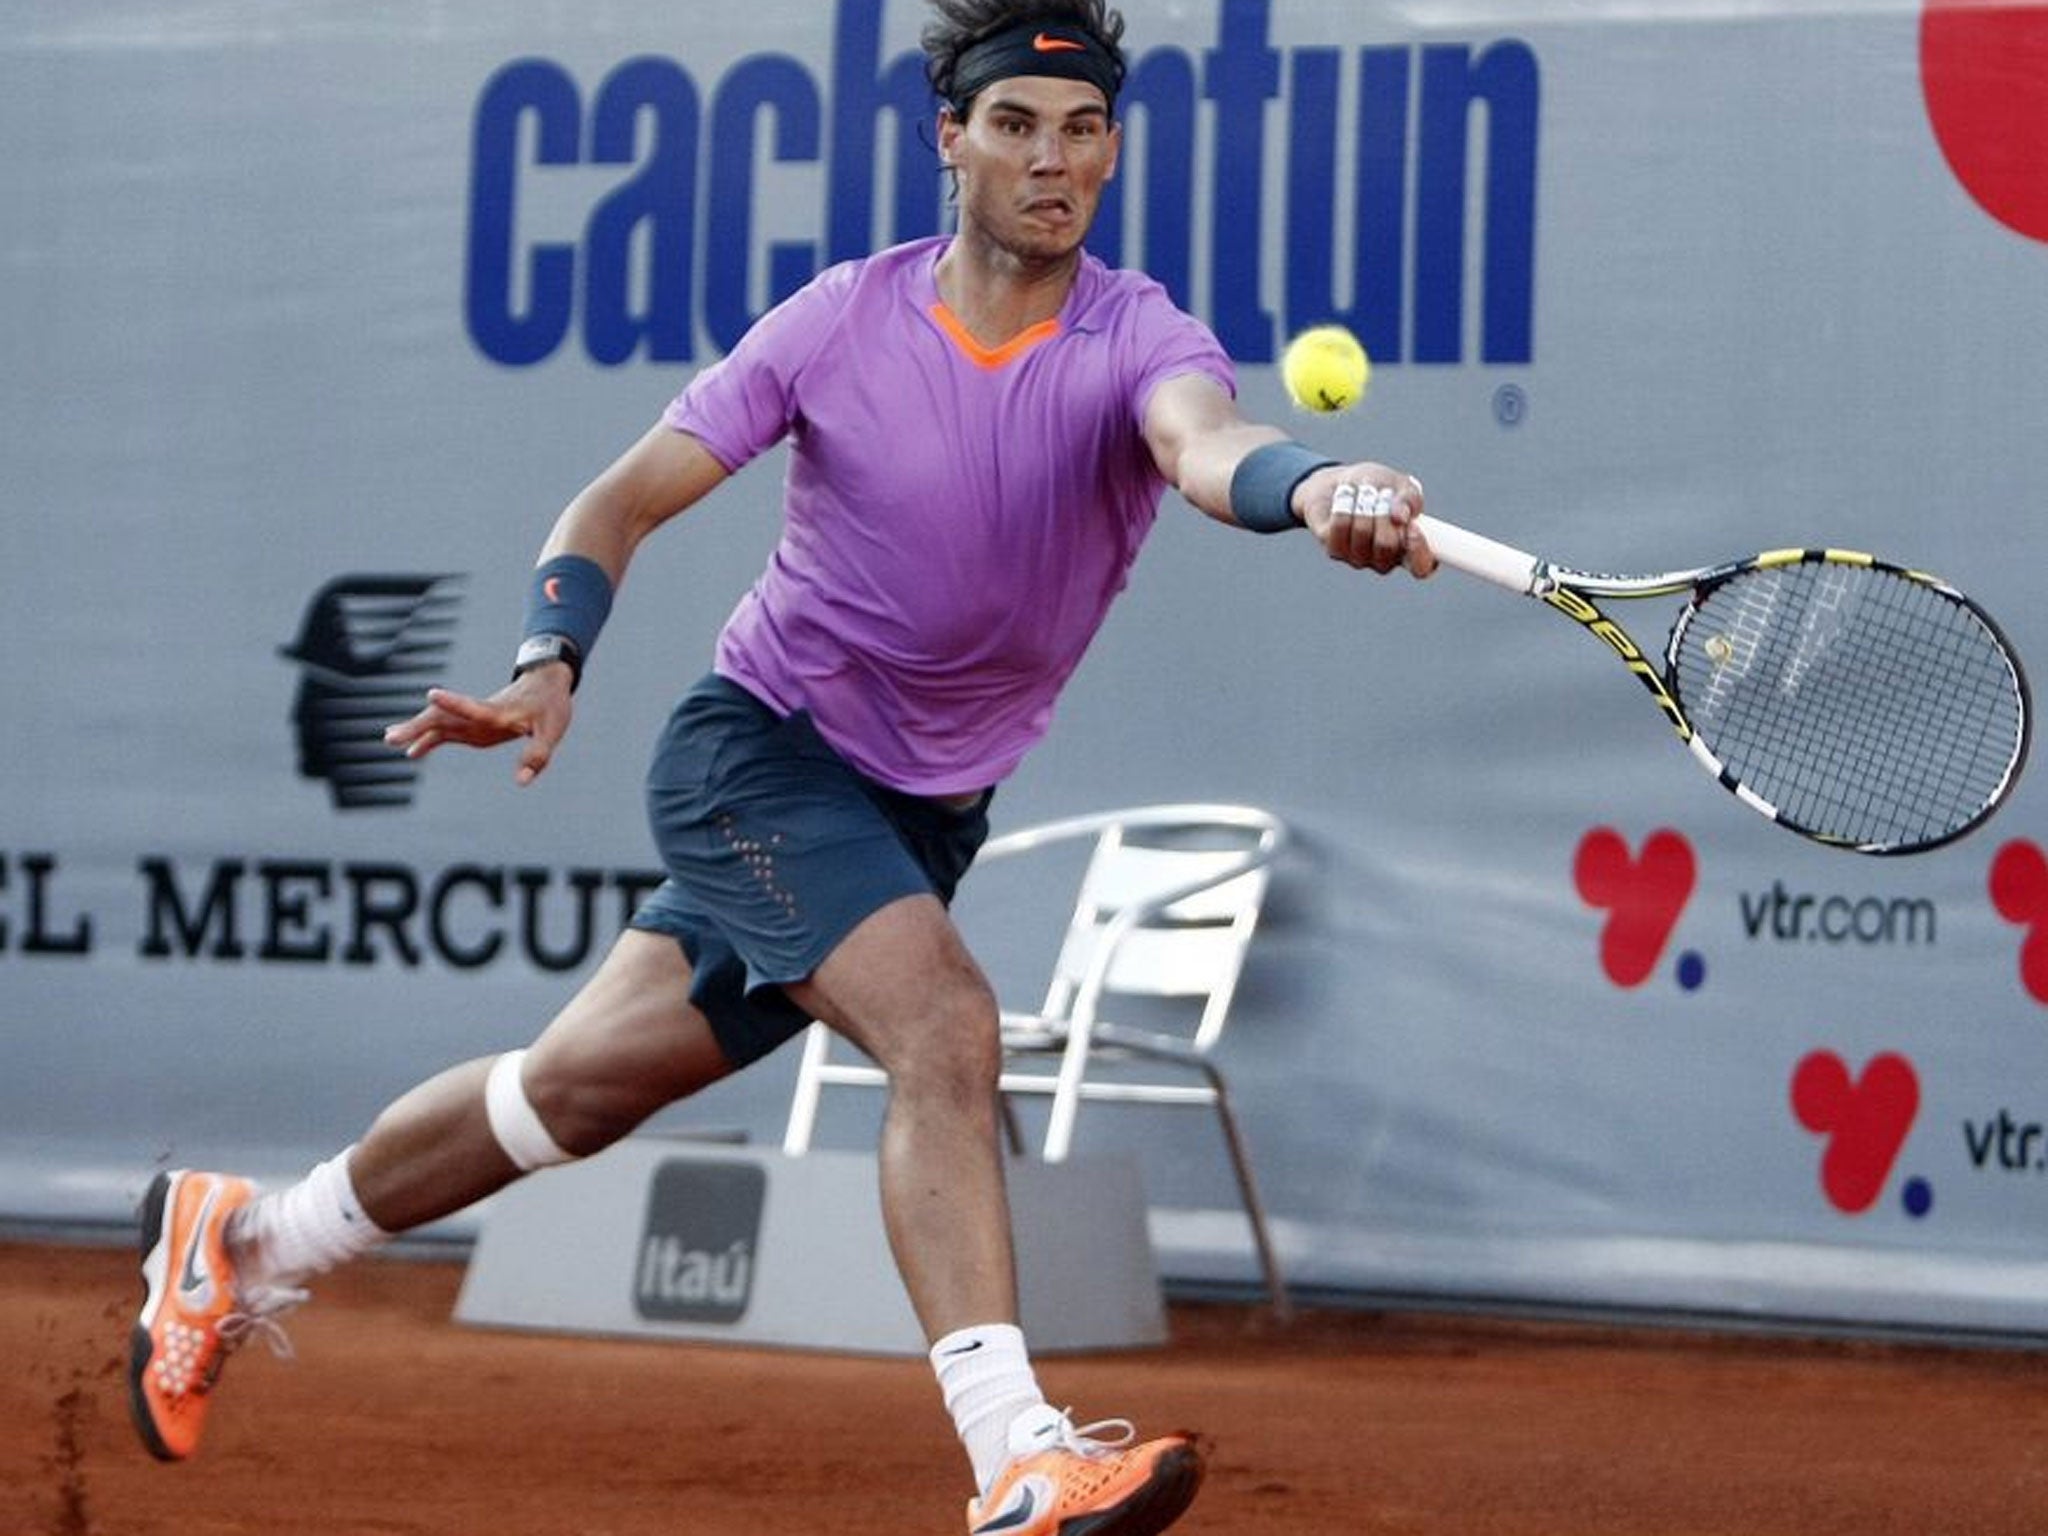 Rafael Nadal admitted that he is still troubled by his knee